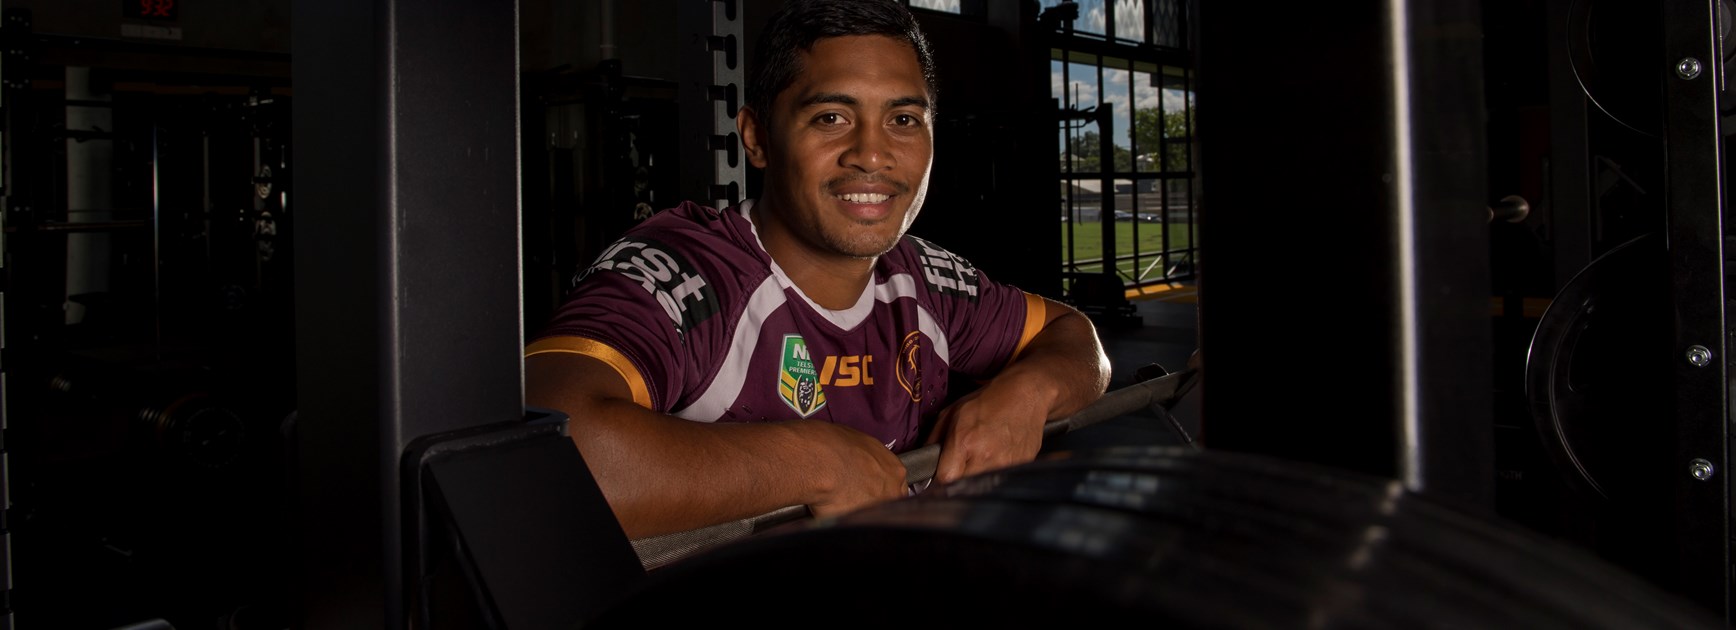 Milford ready to step up and emulate NRL greats: Thaiday